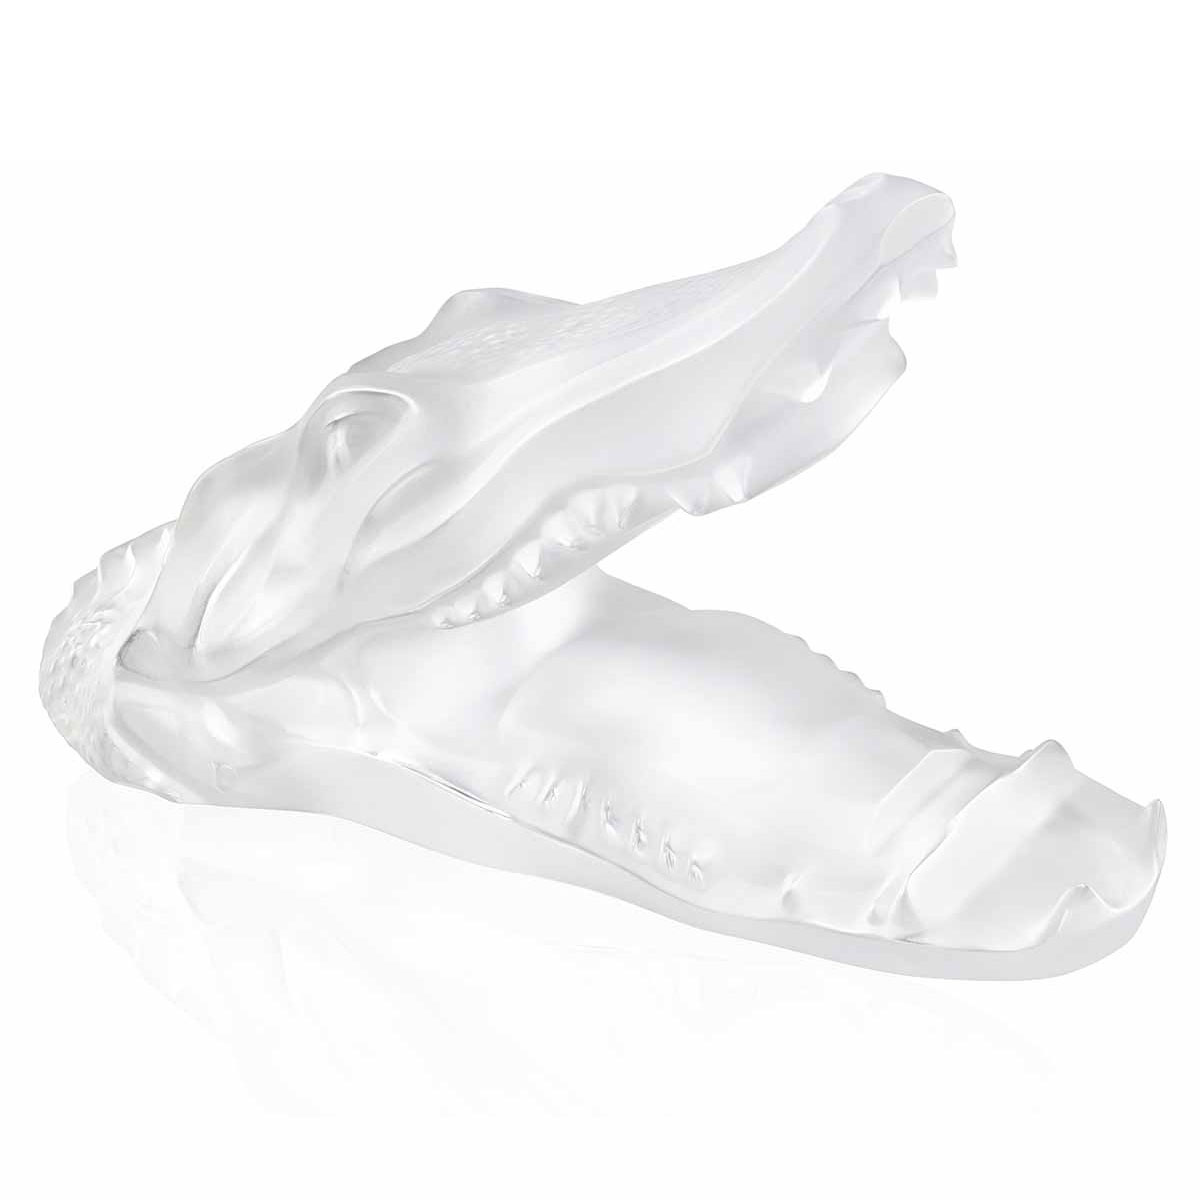 Lalique Crocodile Smartphone and Tablet Holder, Clear